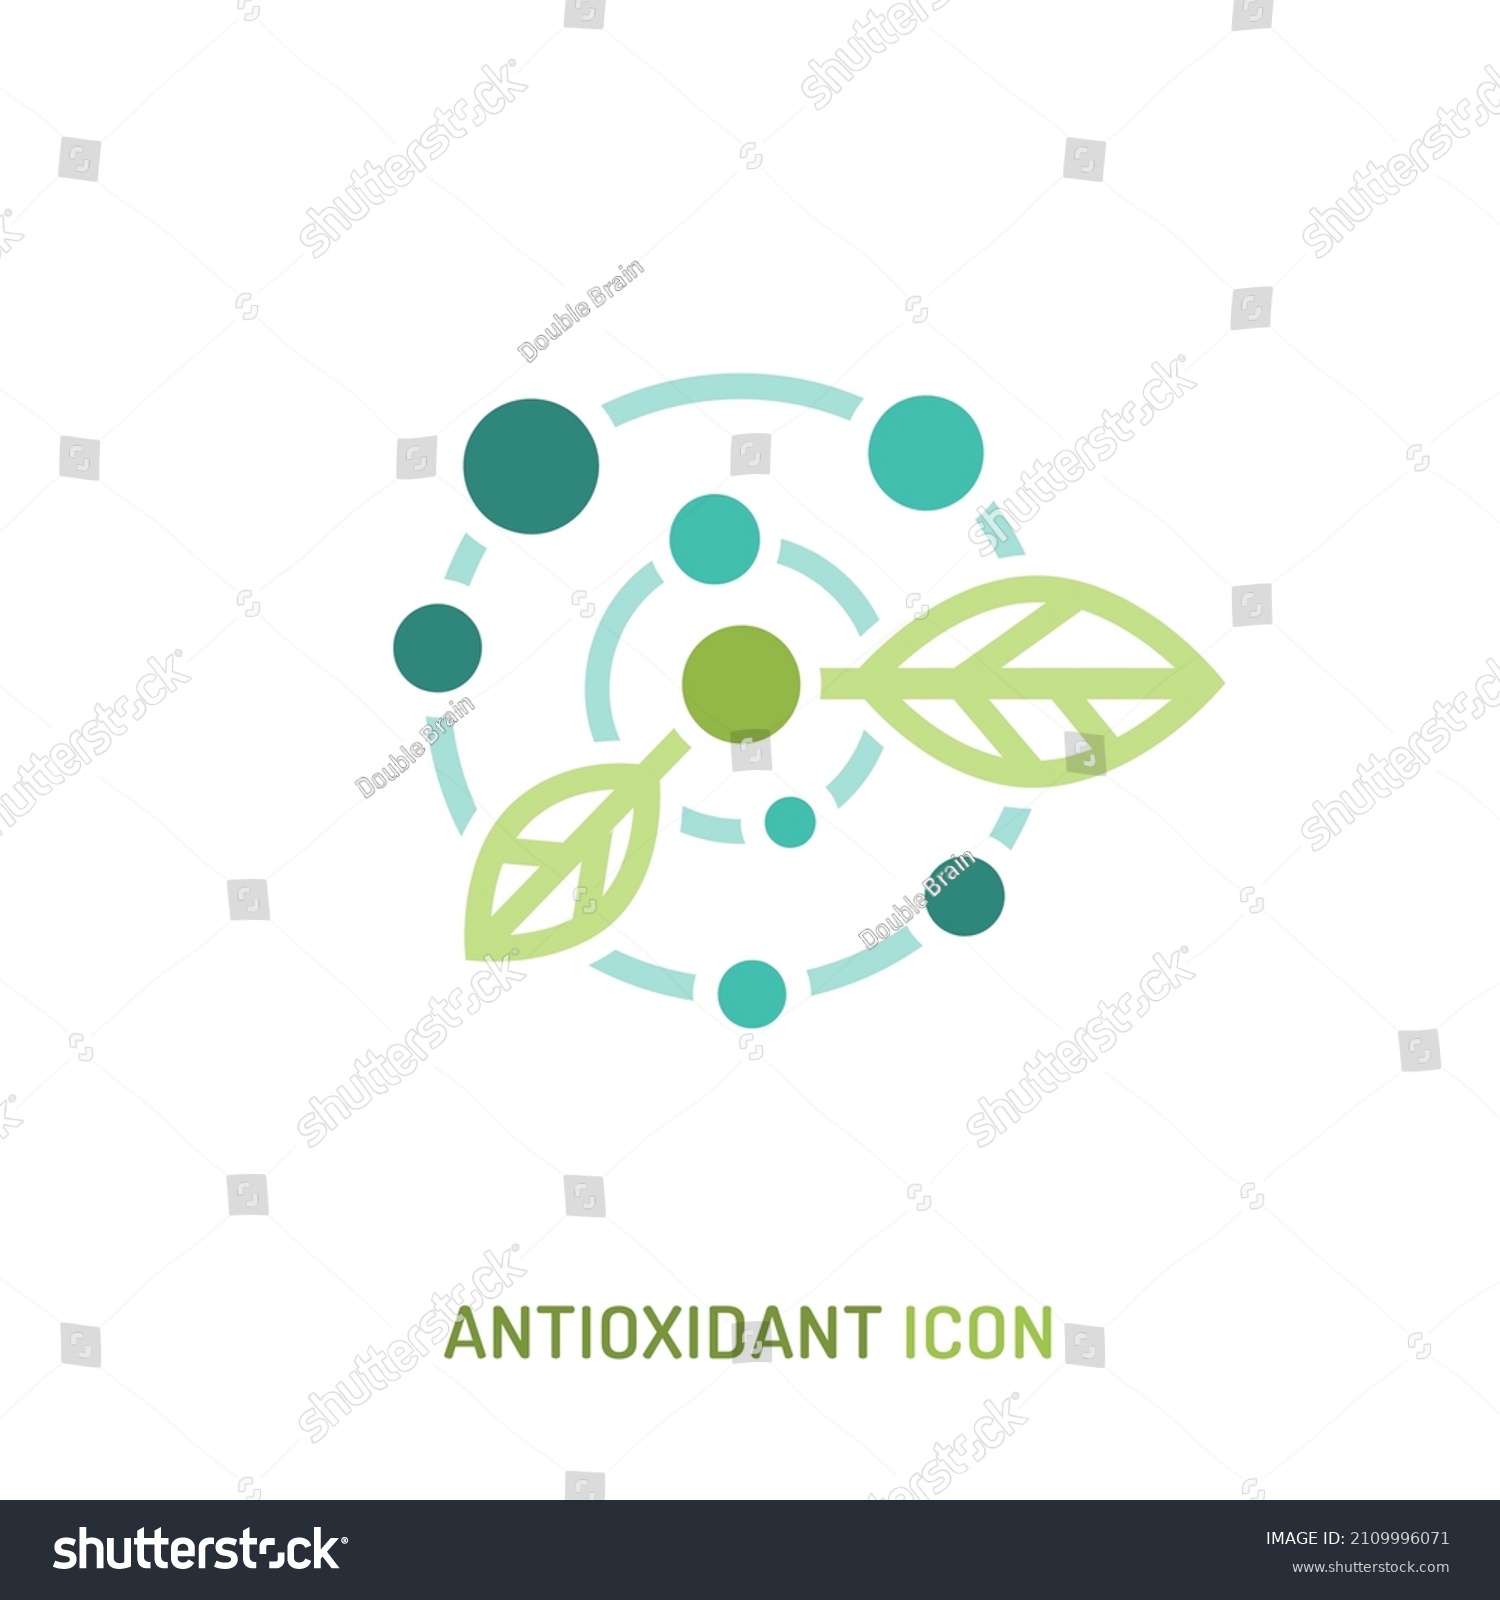 Antioxidant icon. Health benefits molecule, natural vitamins sources, vector isolated illustration for bio organic detox super food advertising, wellness apps. Healthy eating, antiaging dieting. #2109996071